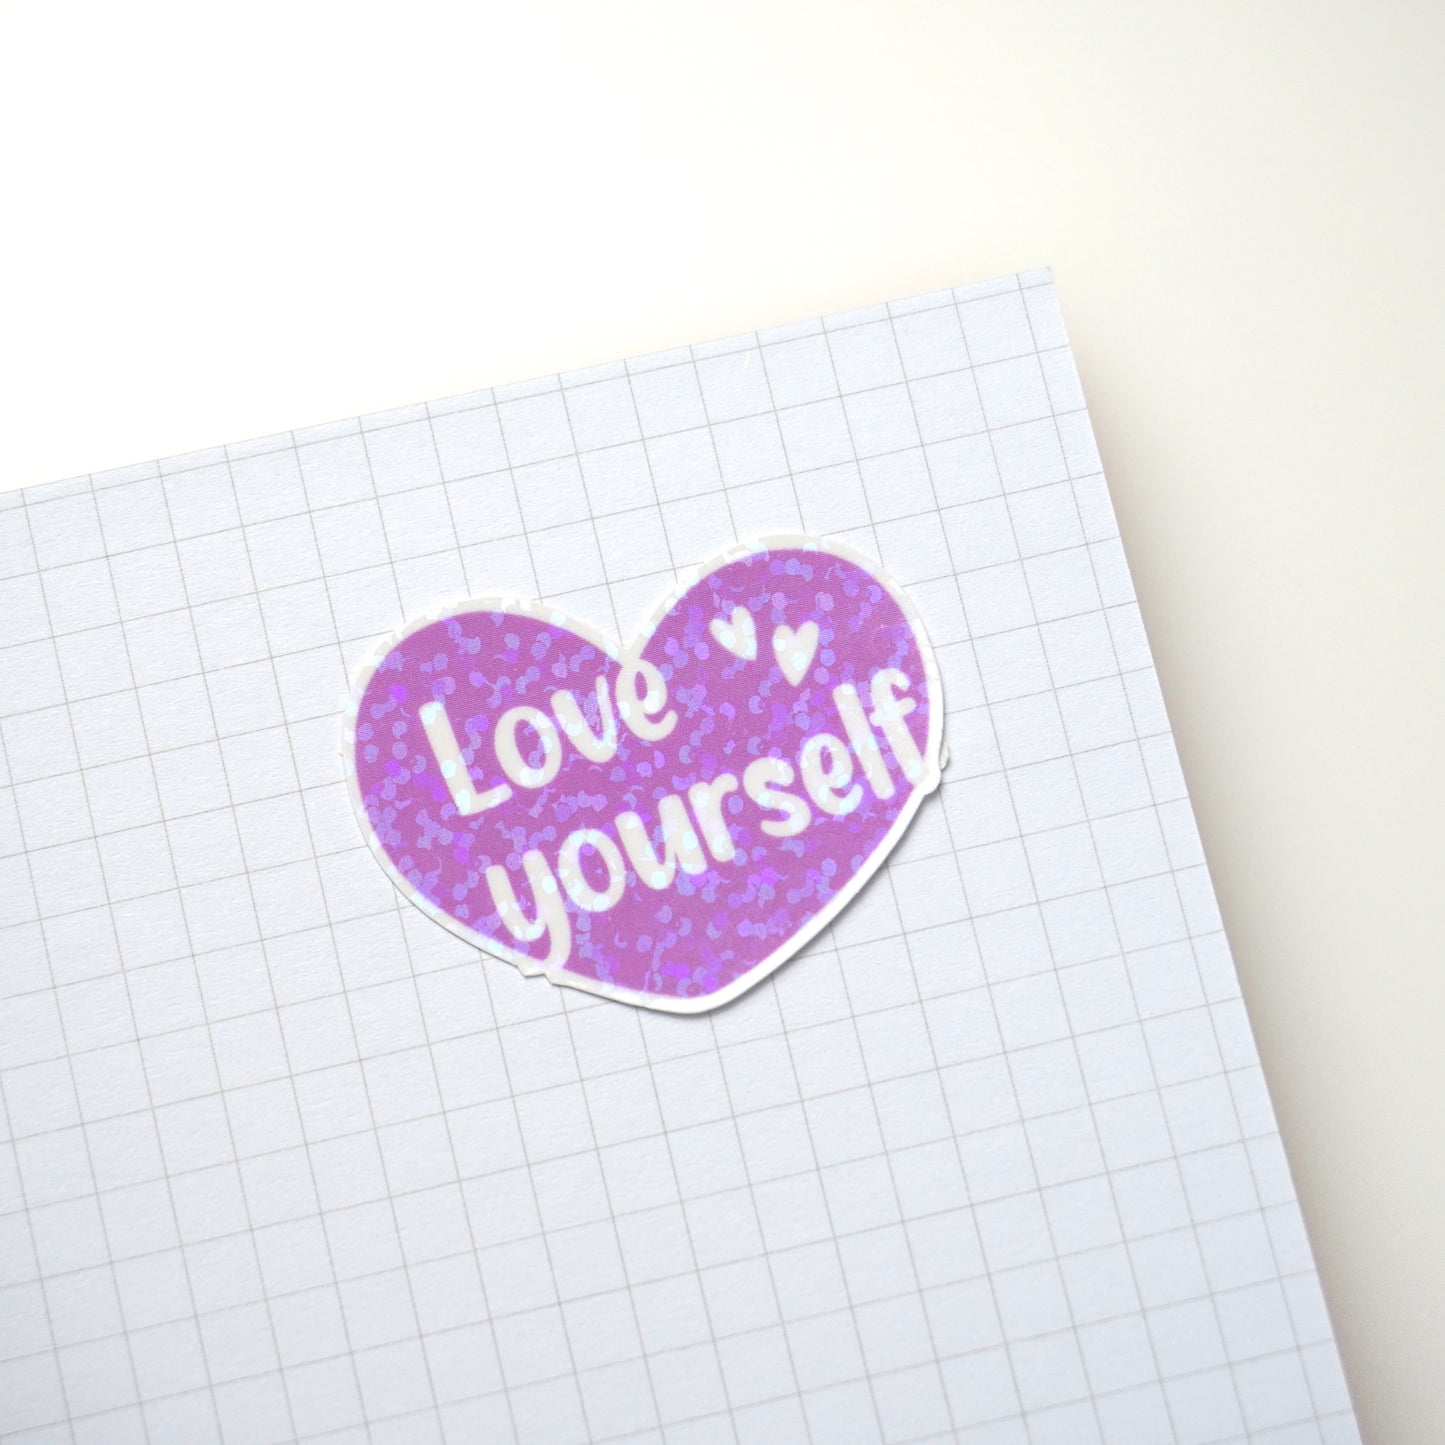 Love yourself (small) | Holographic overlay | Die-cut sticker